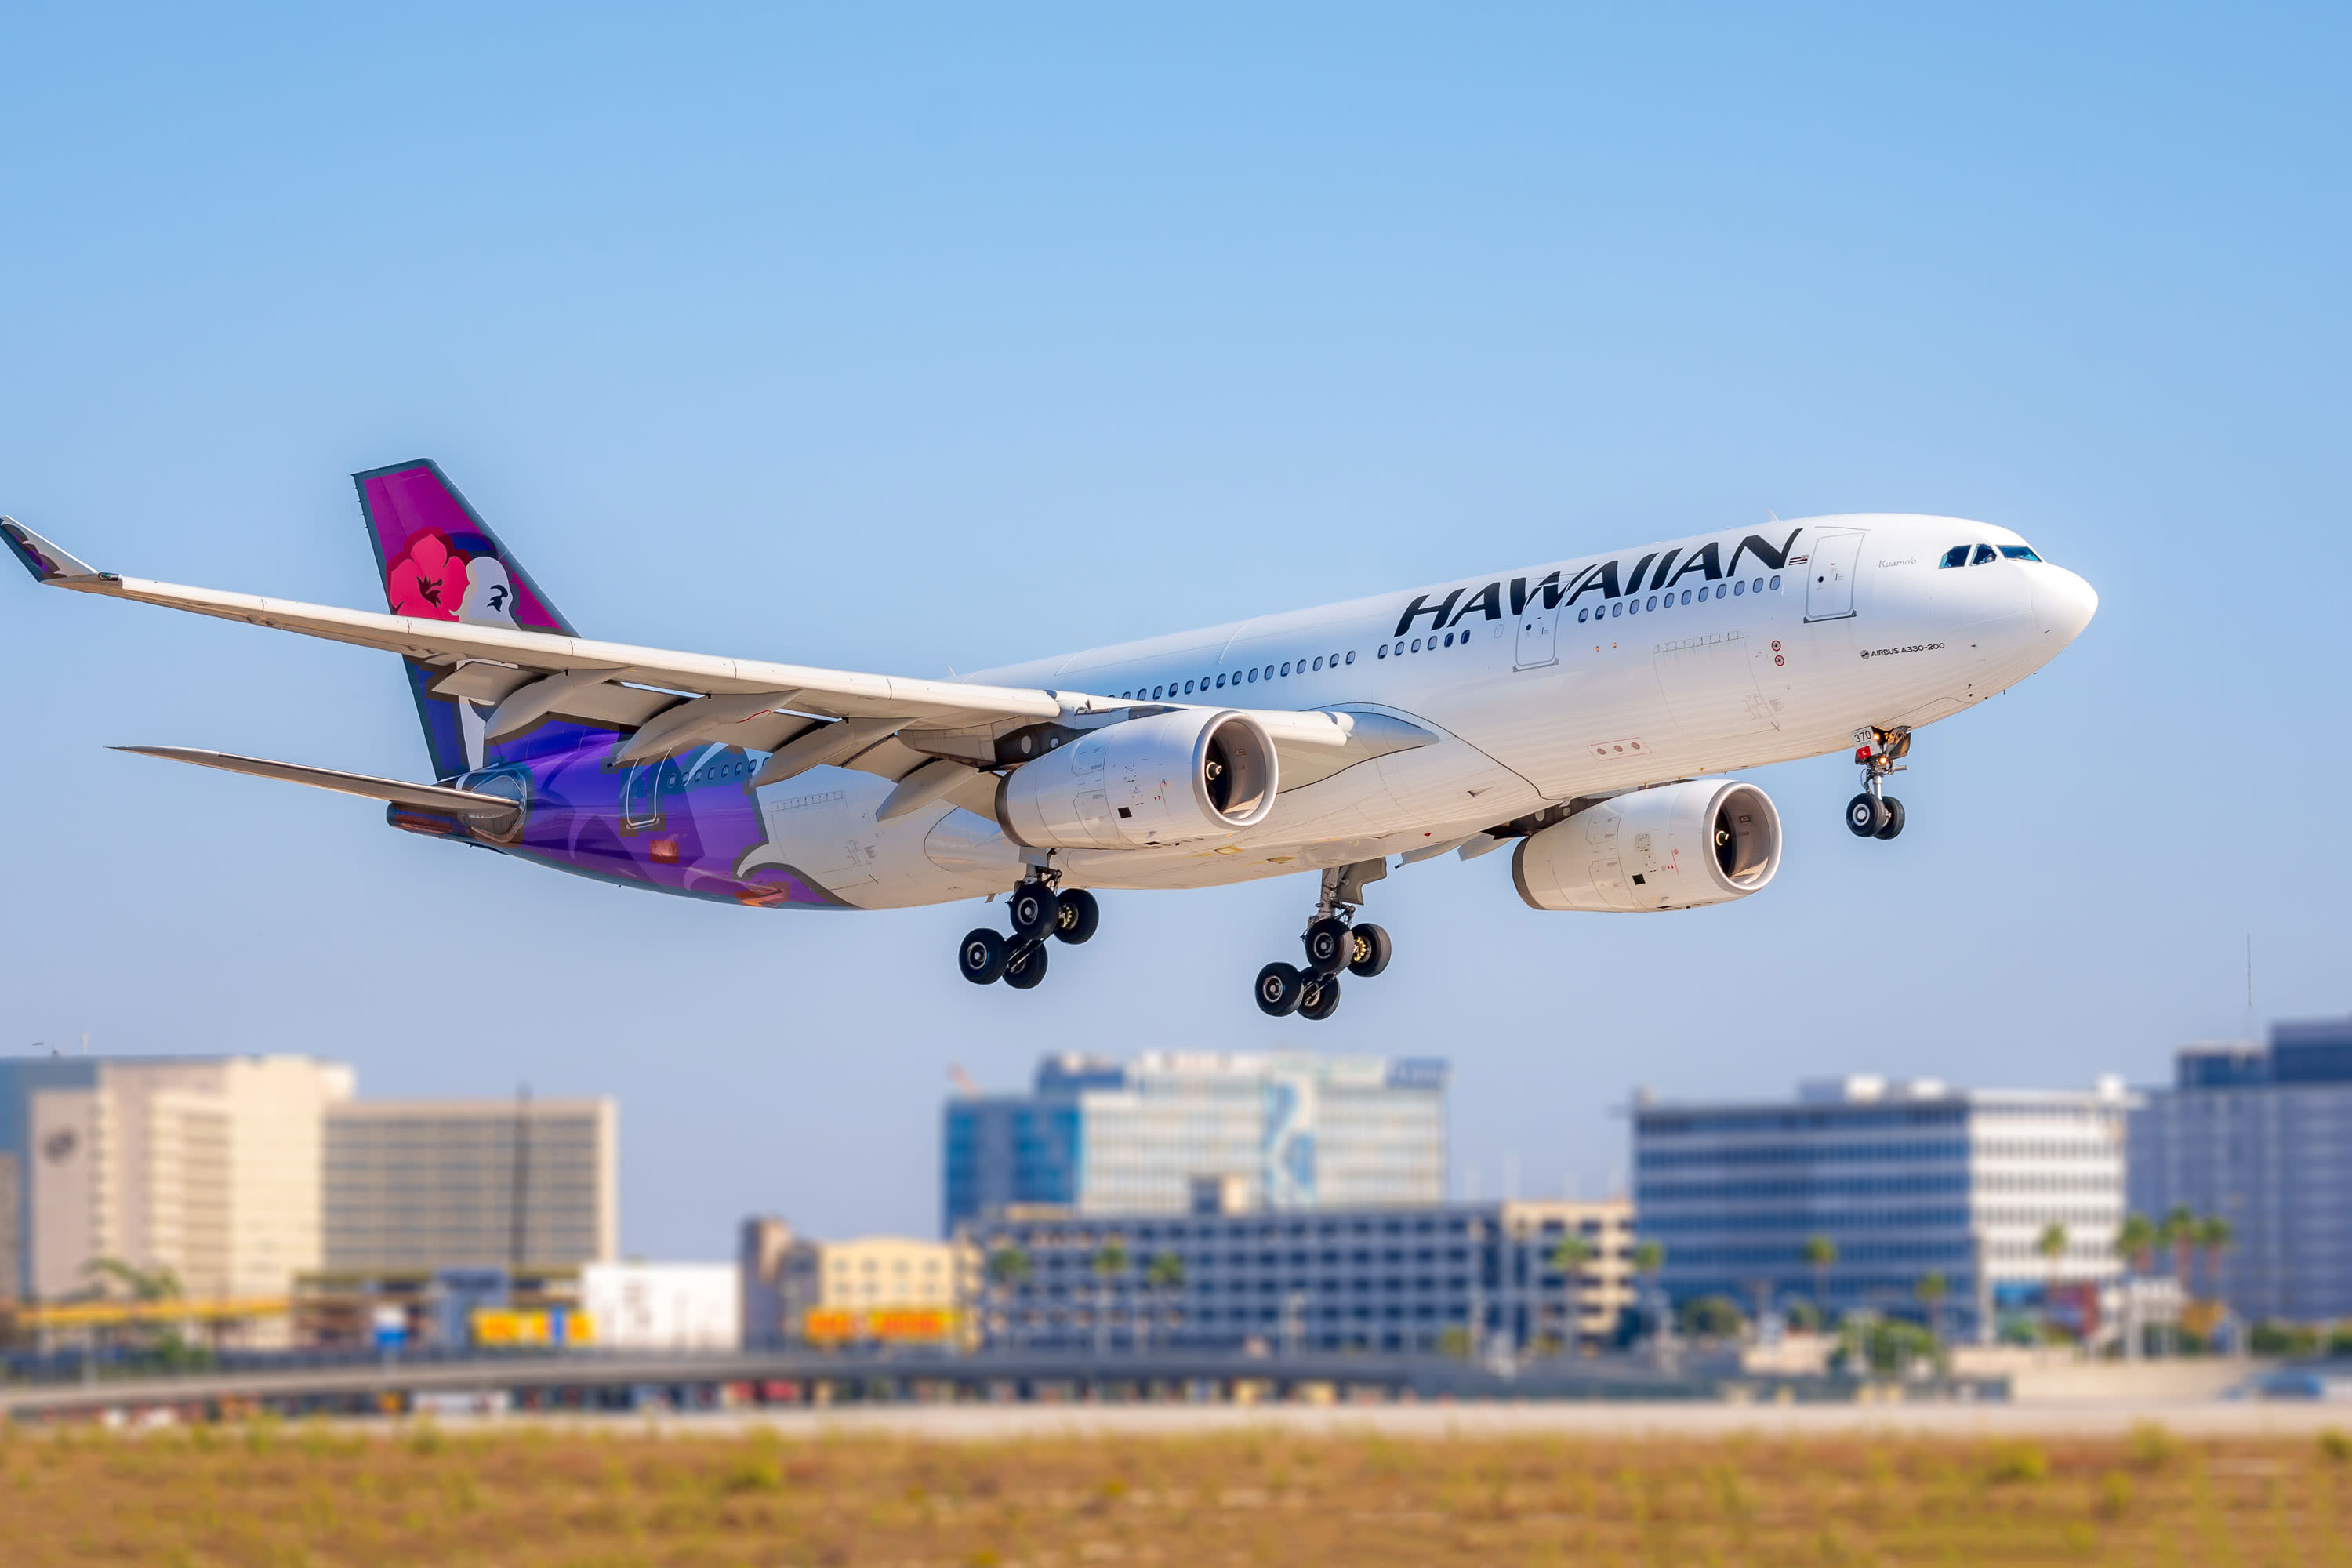 Turbulent Hawaiian Airlines flight seriously injures 11 people